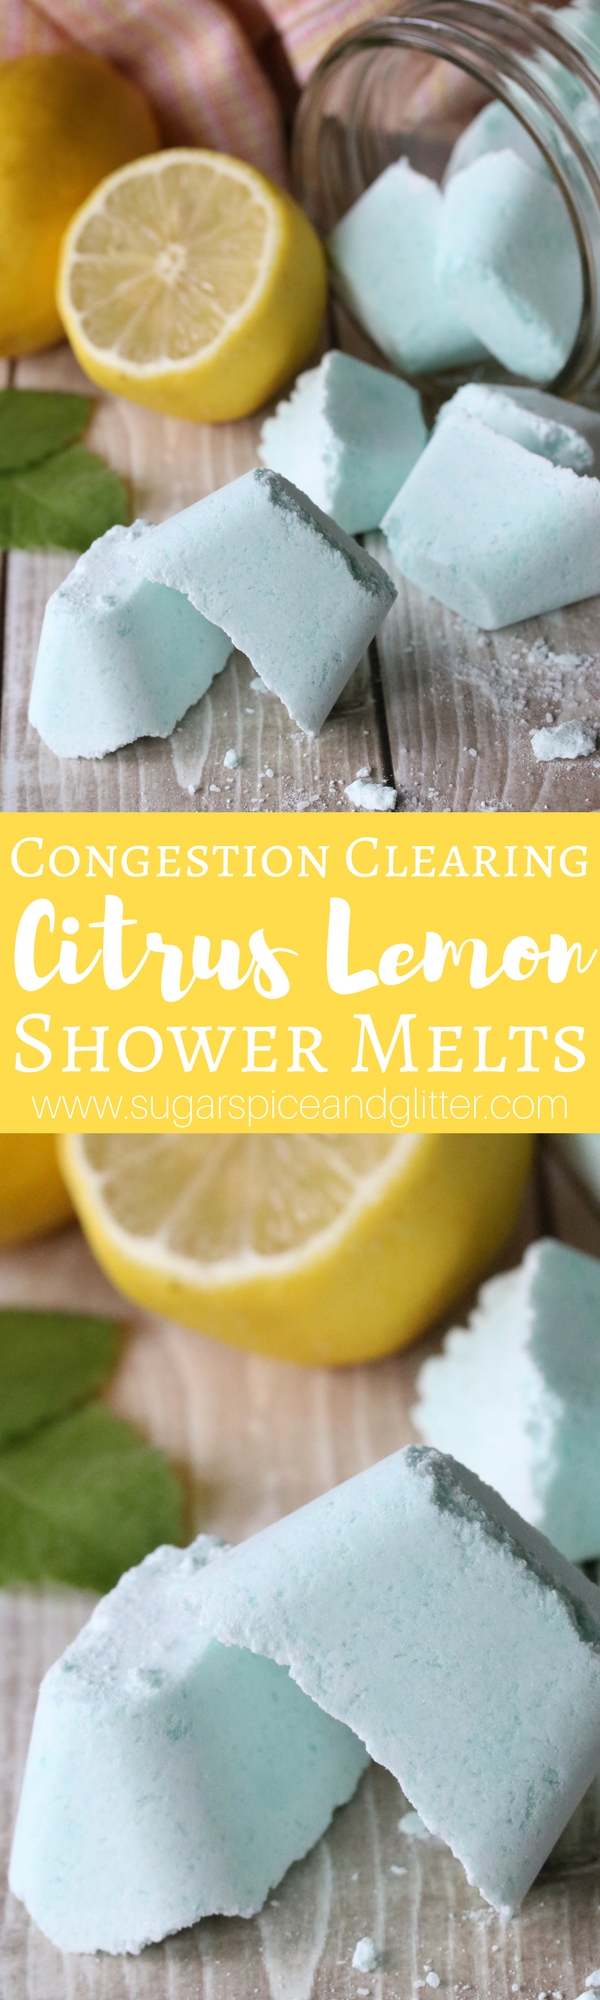 Whip up a batch of these Homemade Lemon Peppermint Shower Melts and keep them on hand when allergies or dry air reek havoc on your breathing. Shower Melts are a great way to help clear up congestion in the shower.